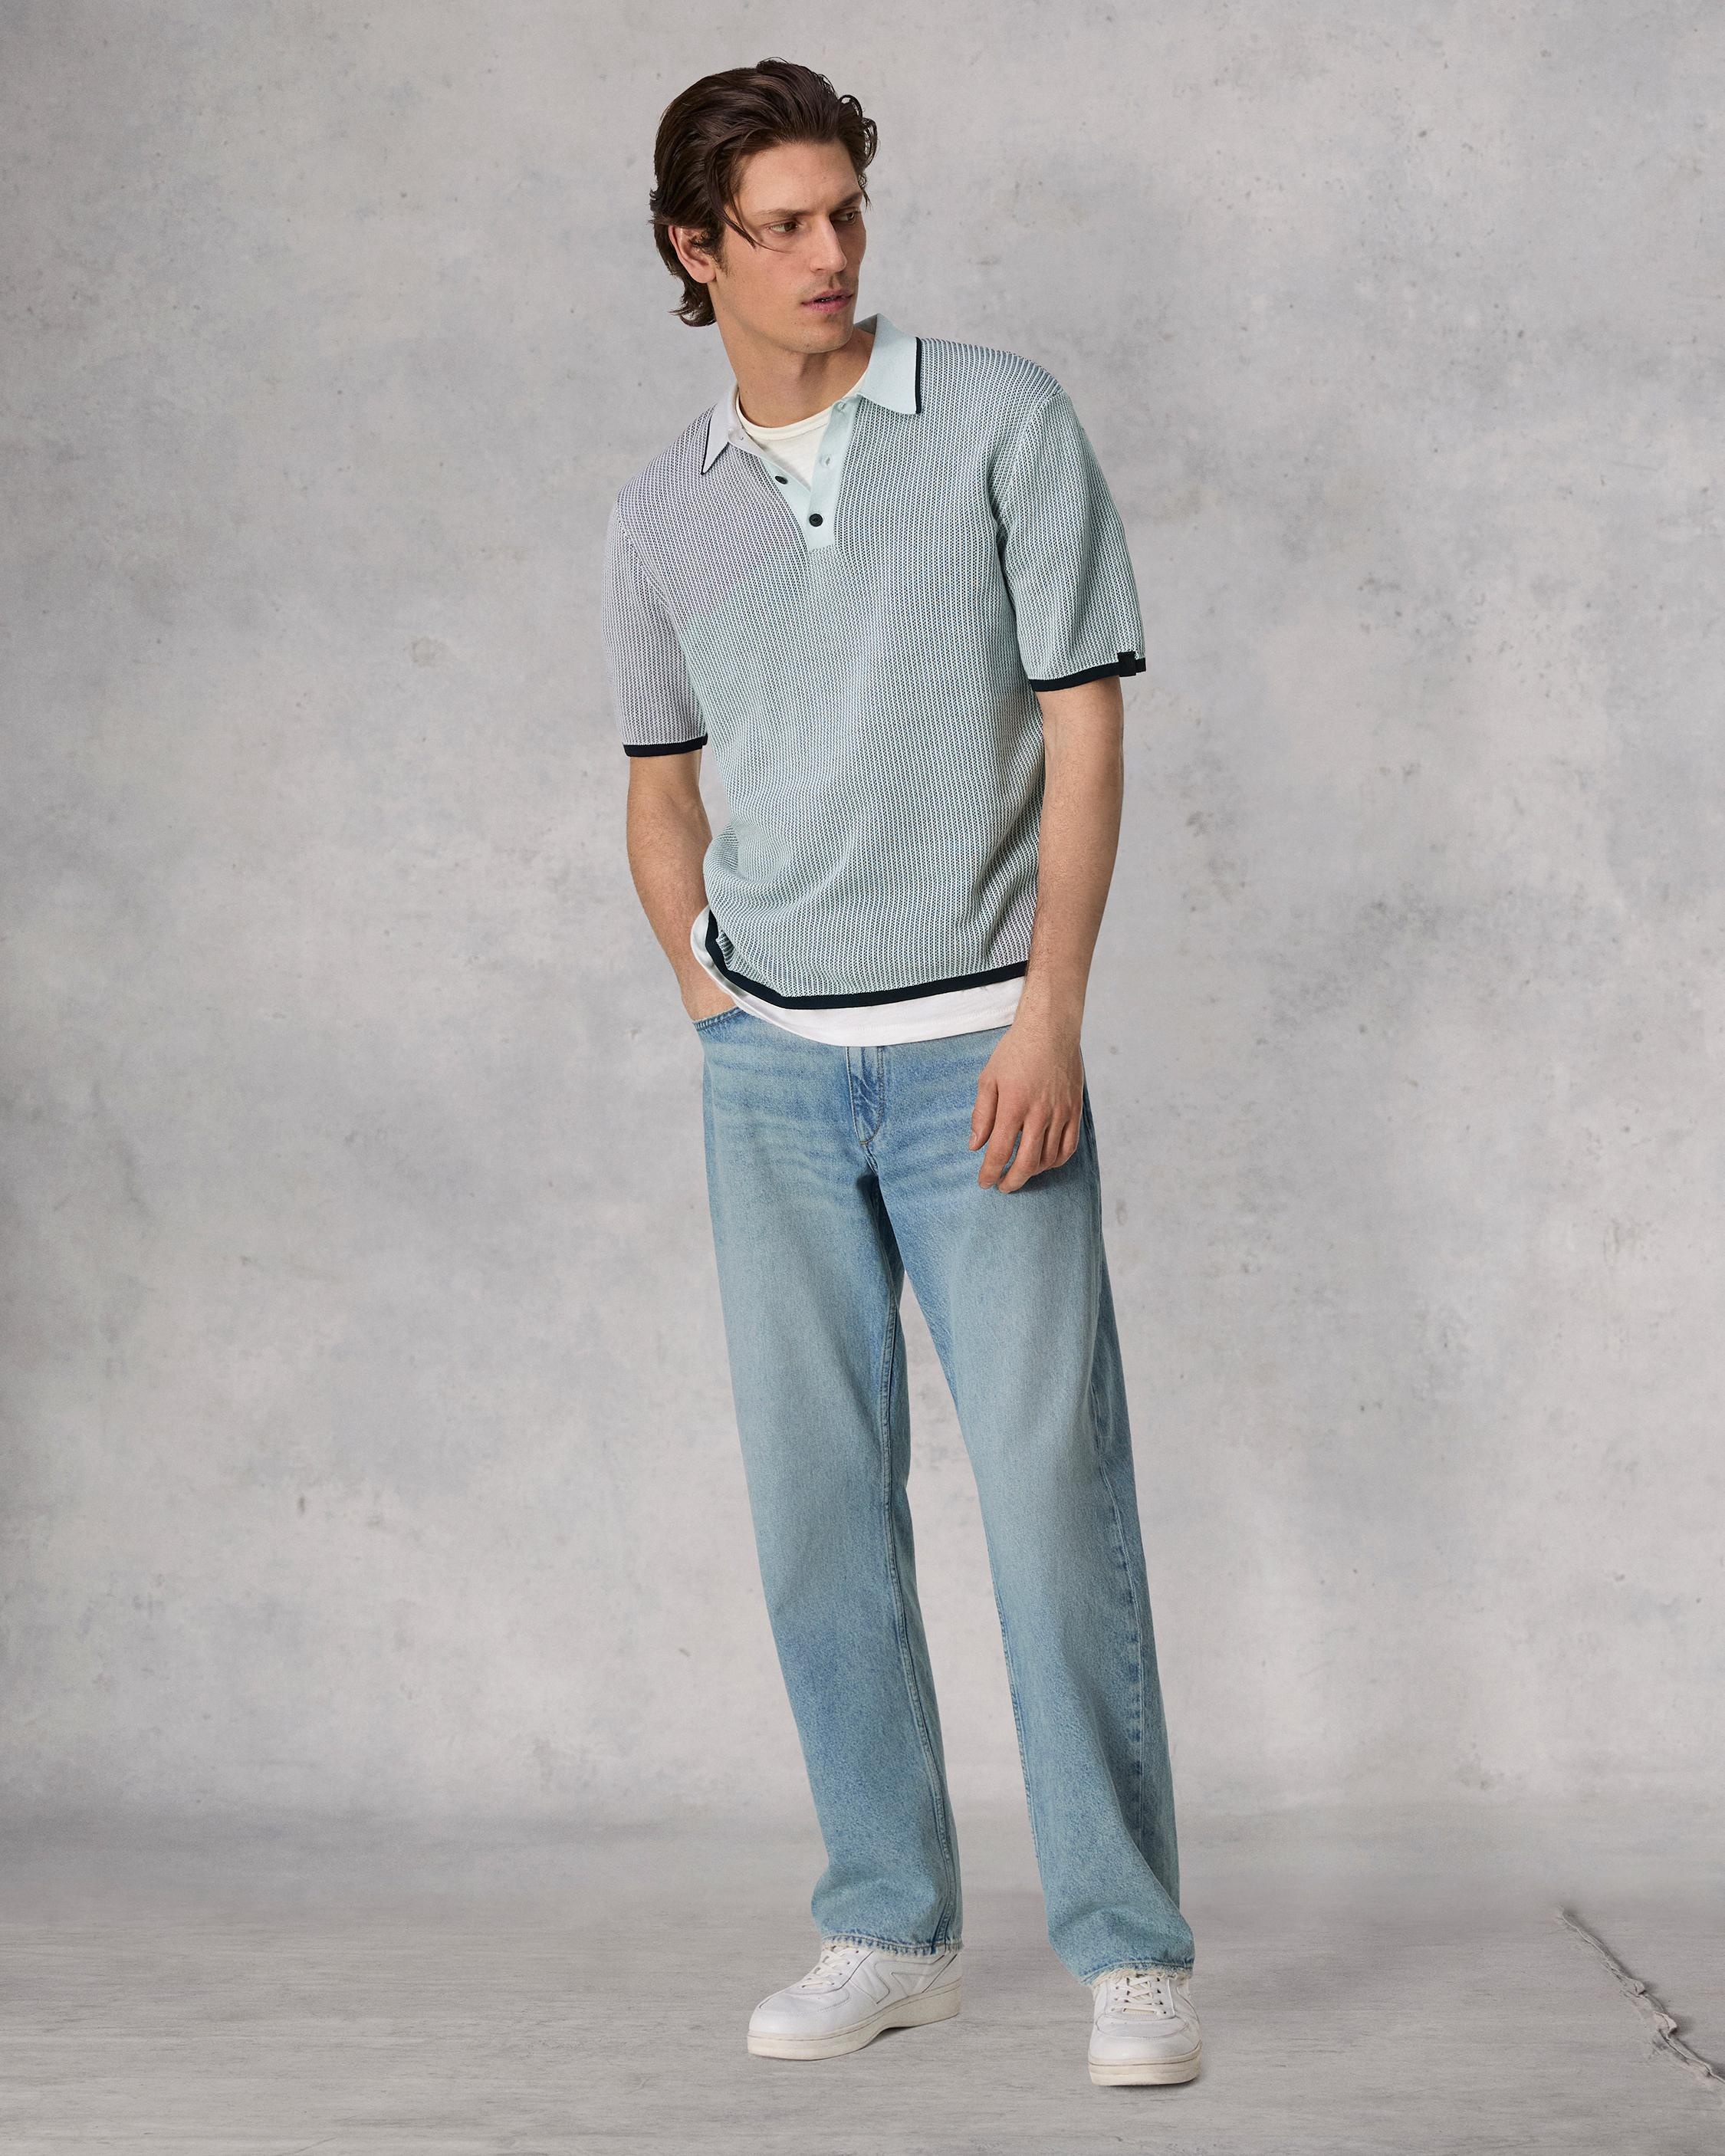 Harvey Polo
Classic Fit - 3